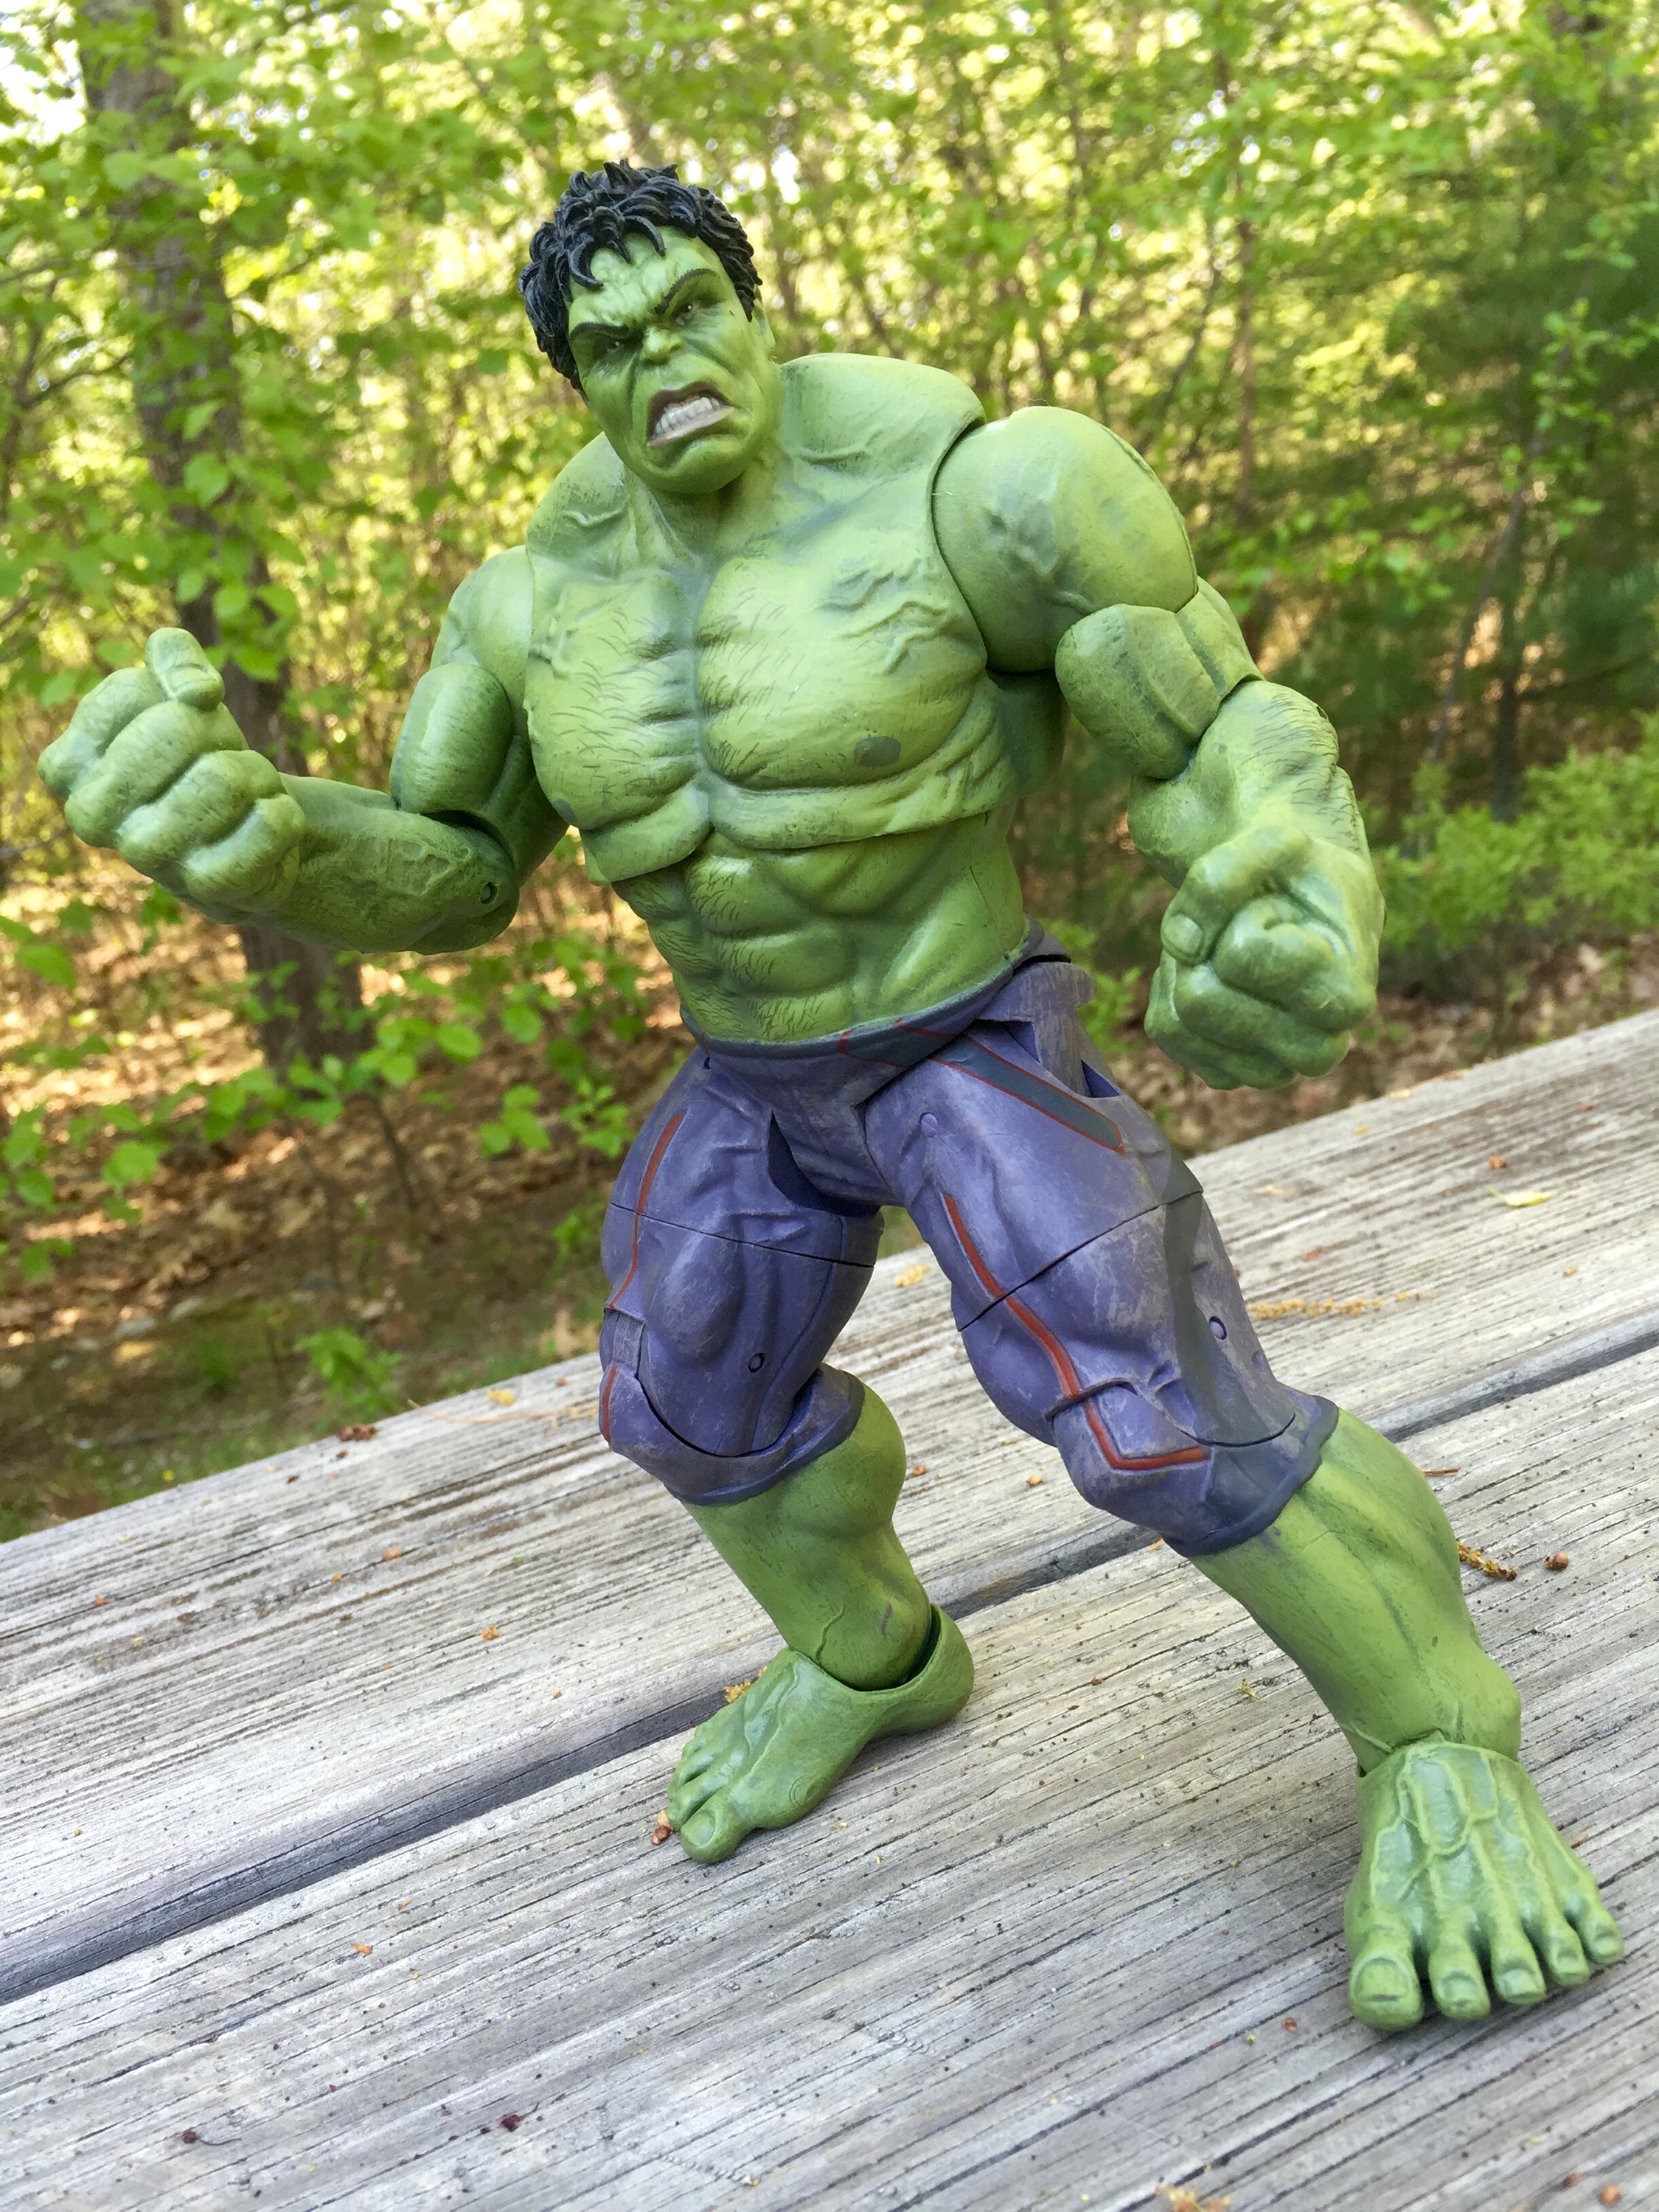 Marvel Select Avengers Age of Ultron Hulk Figure Review - Marvel Toy News